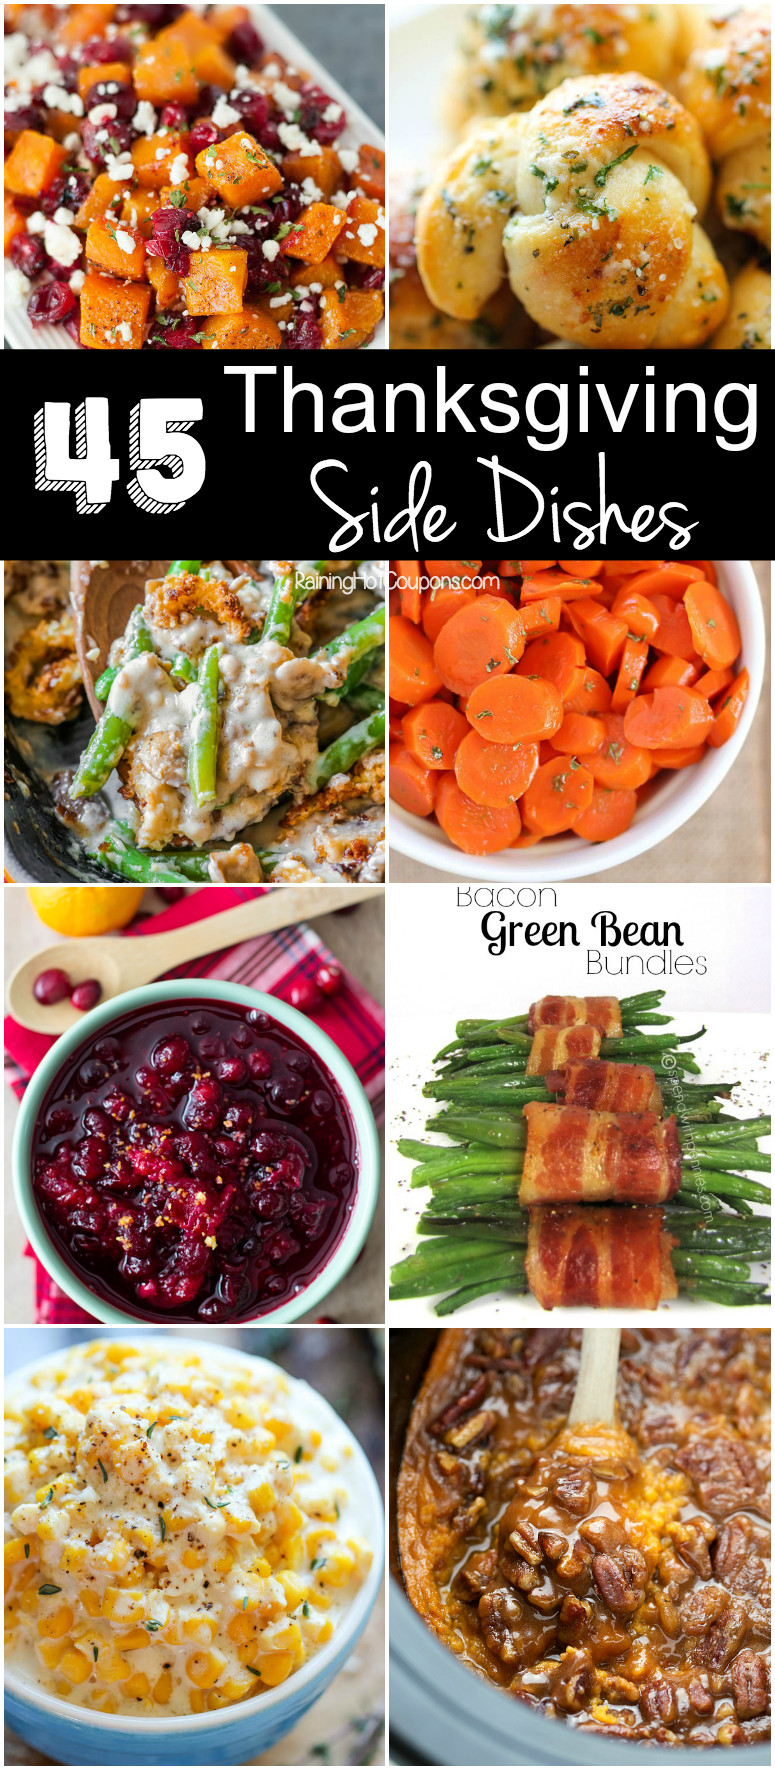 Thanksgiving Dinner Side Dishes Recipes
 45 Thanksgiving Side Dishes